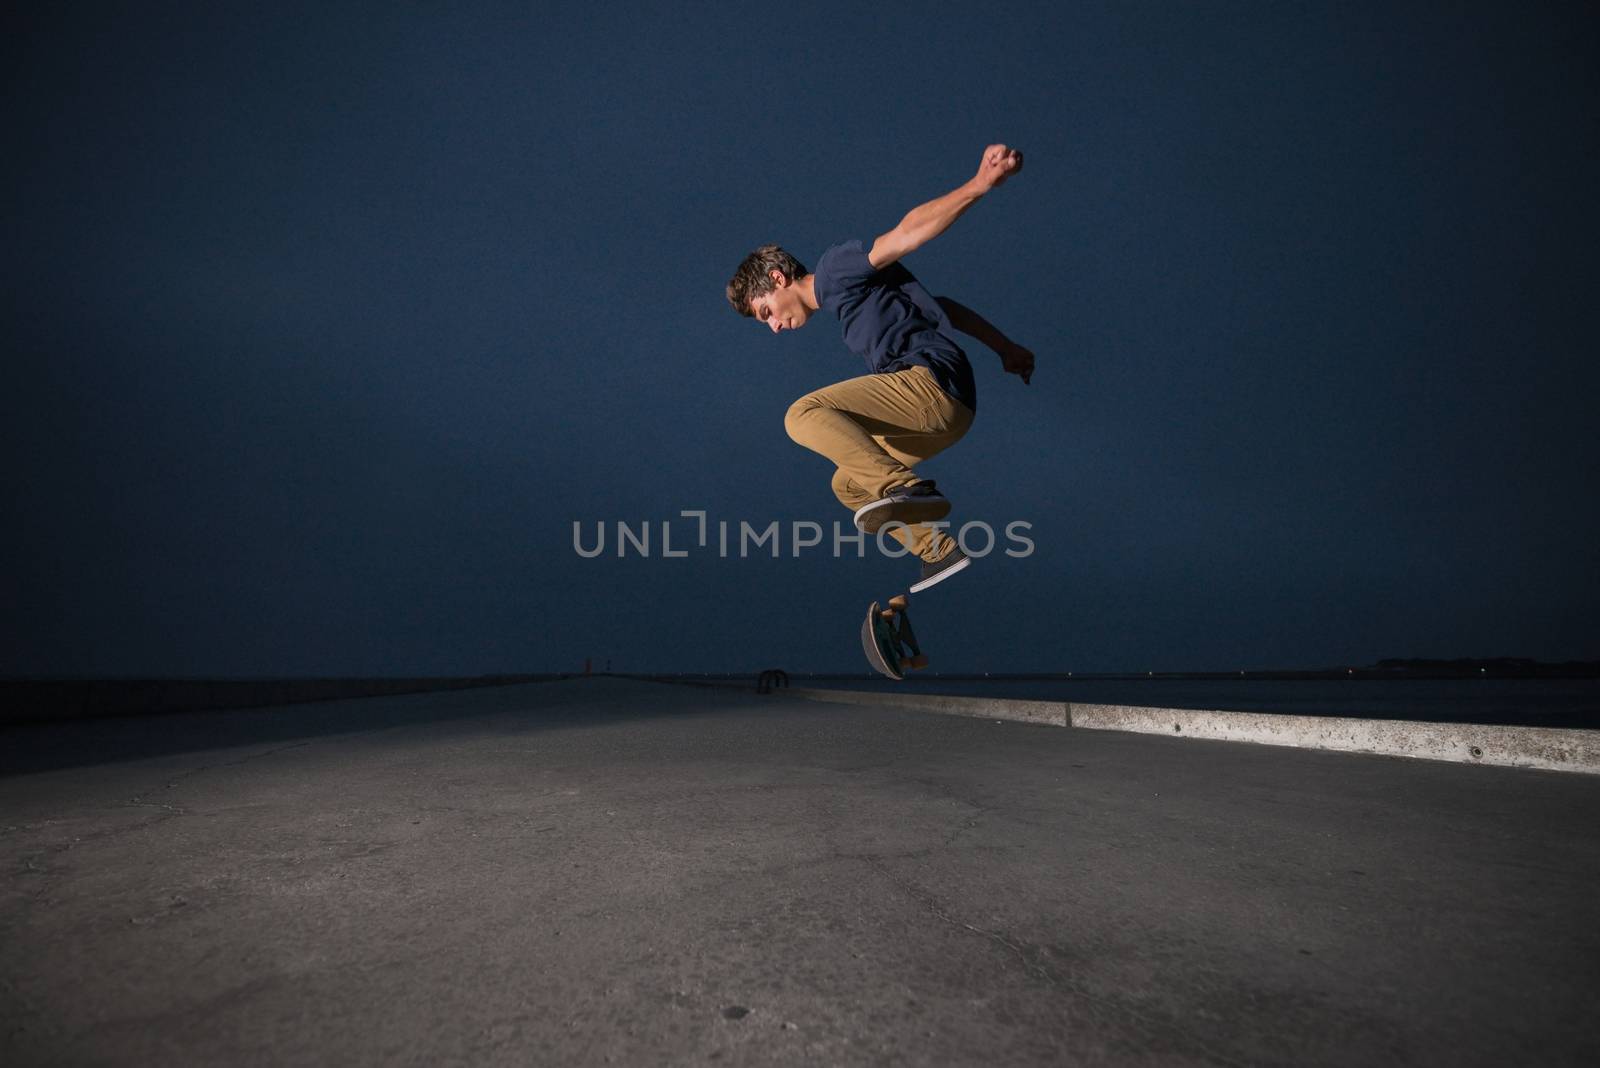 Skateboarder performing a ollie flip on a concrete pavement along the harbour.